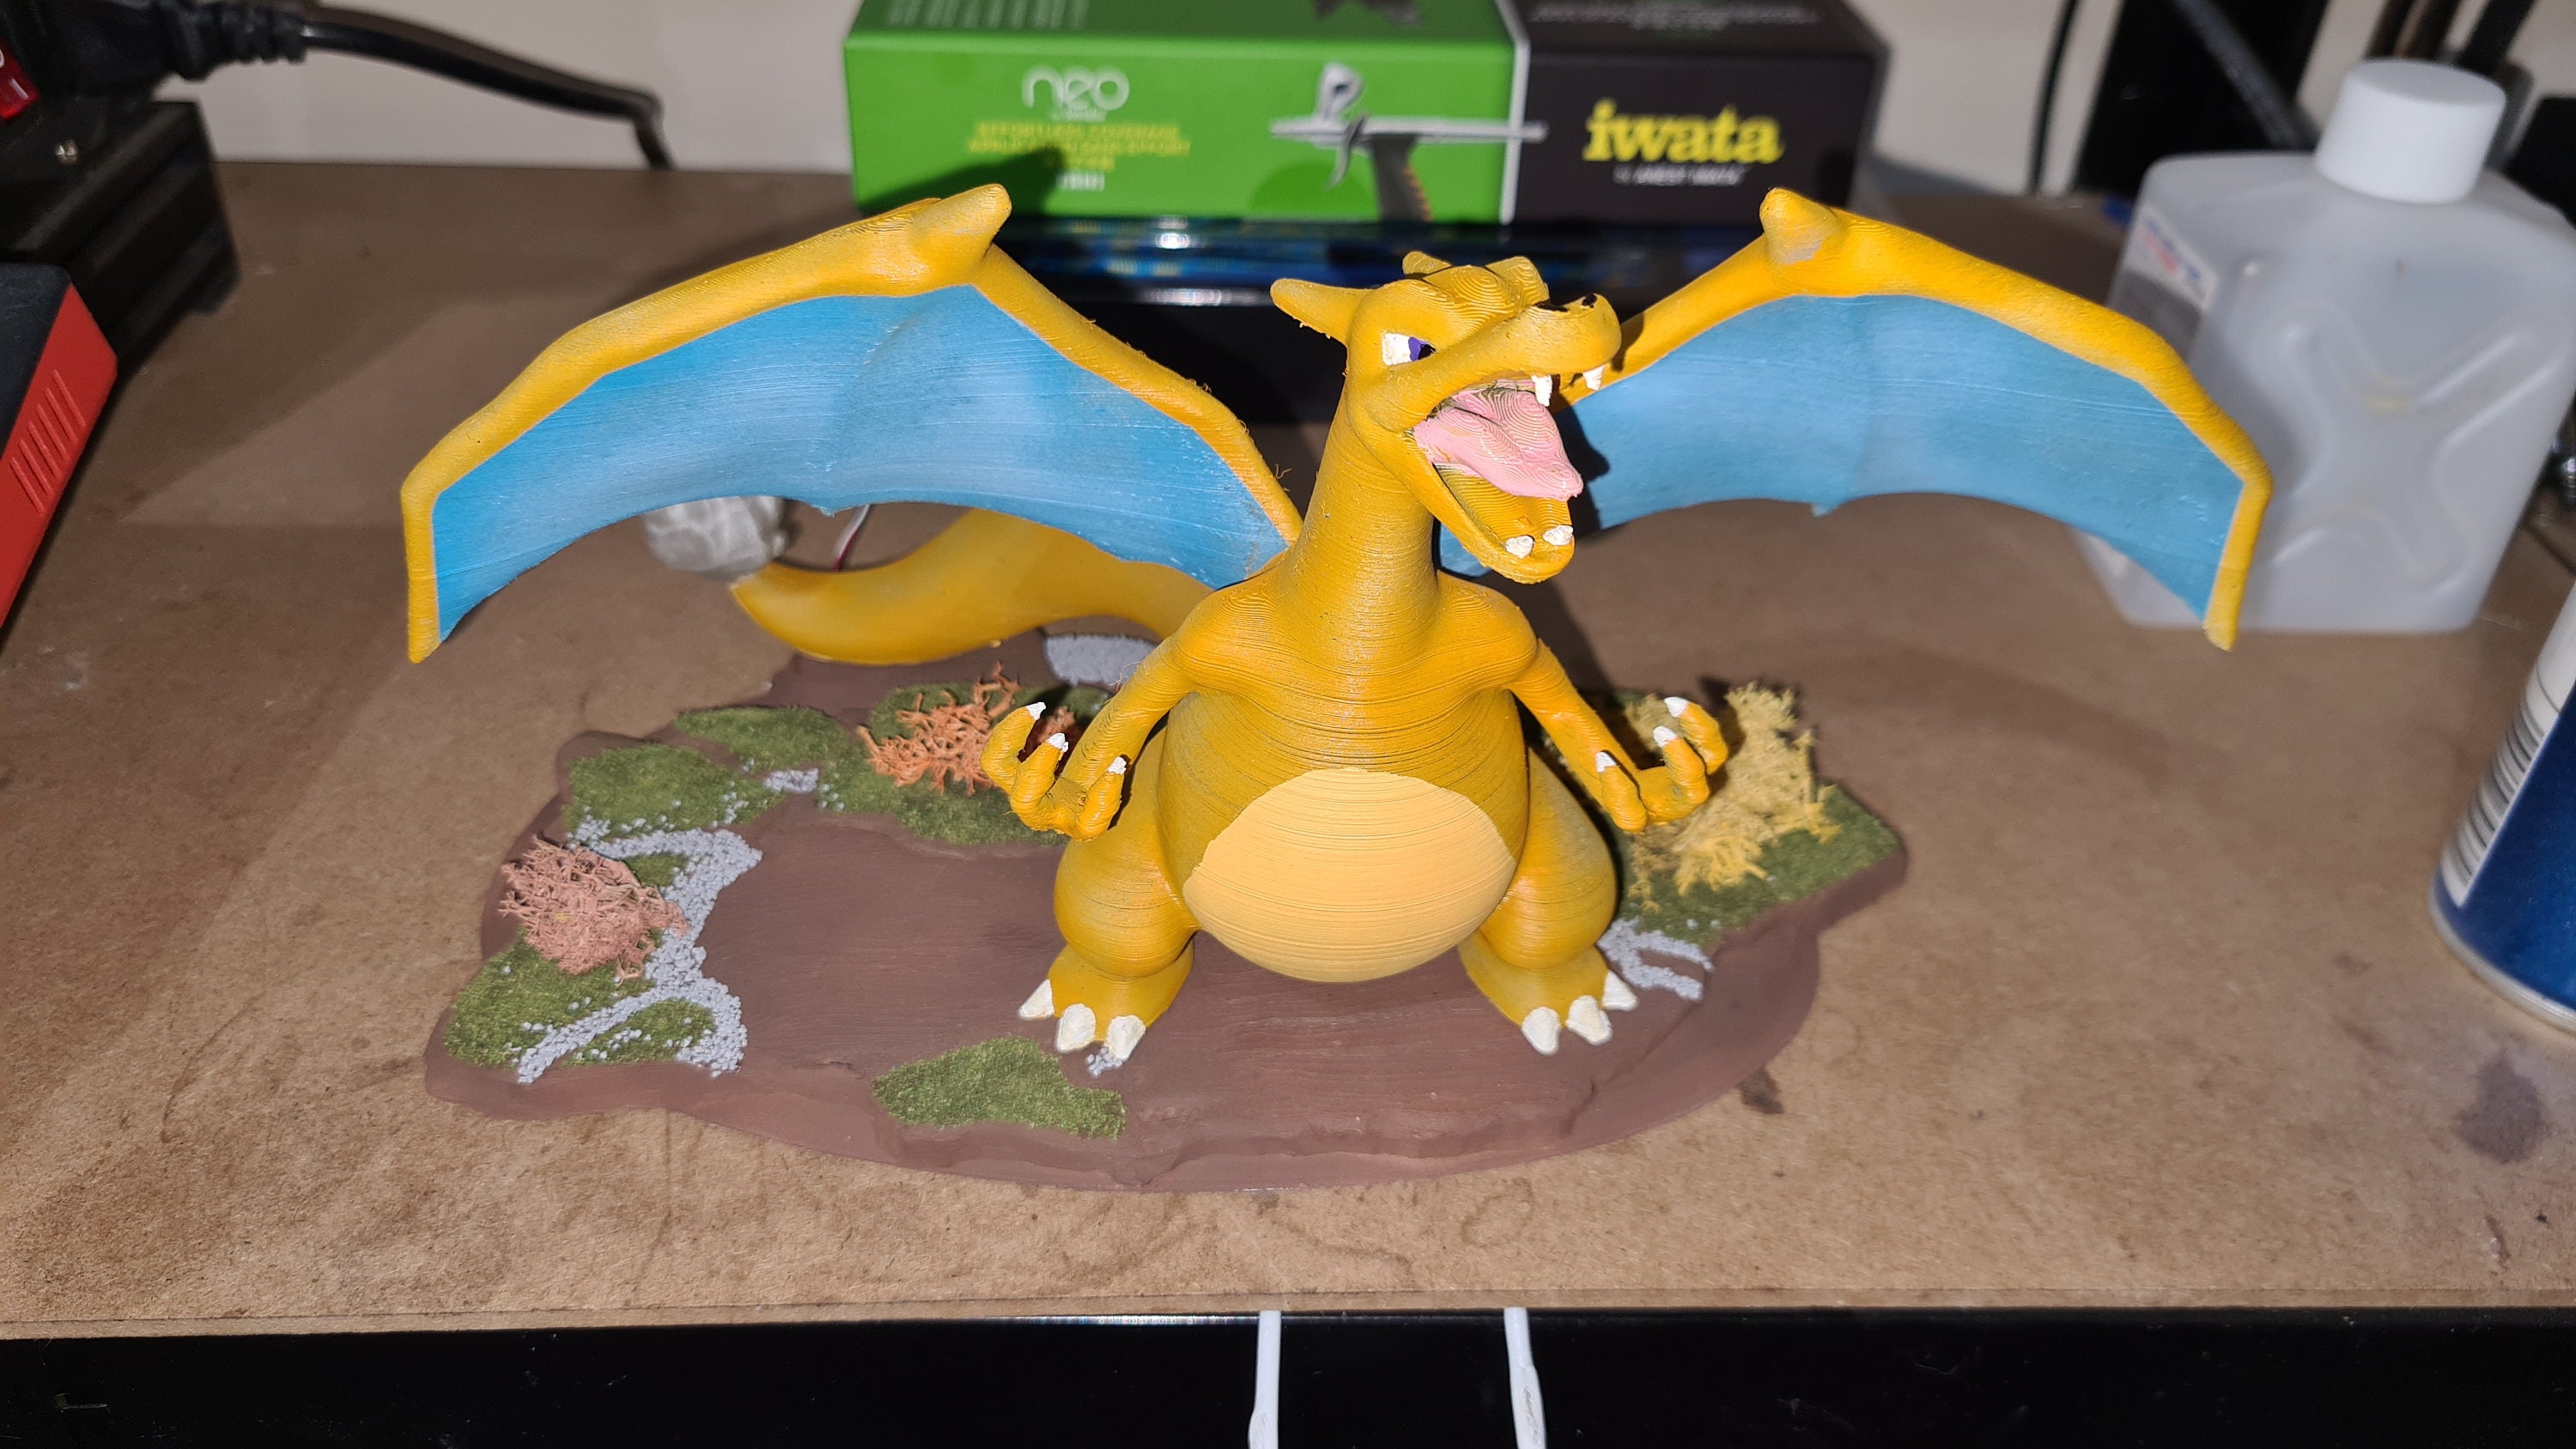 Charizard XY and Rock 3D model rigged